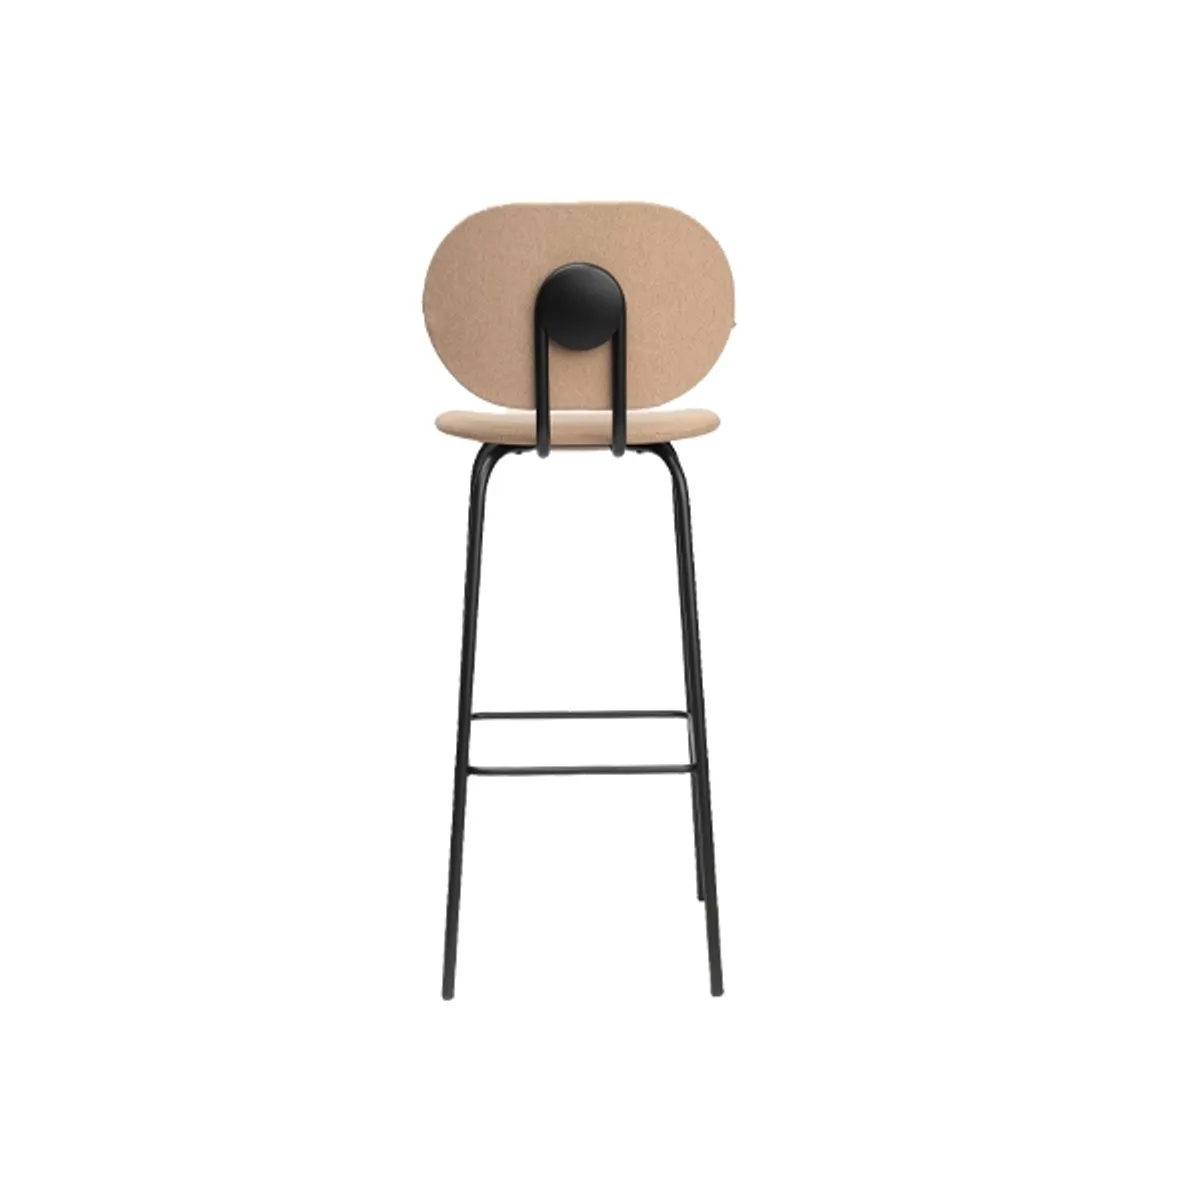 Hattie bar stool Inside Out Contracts2